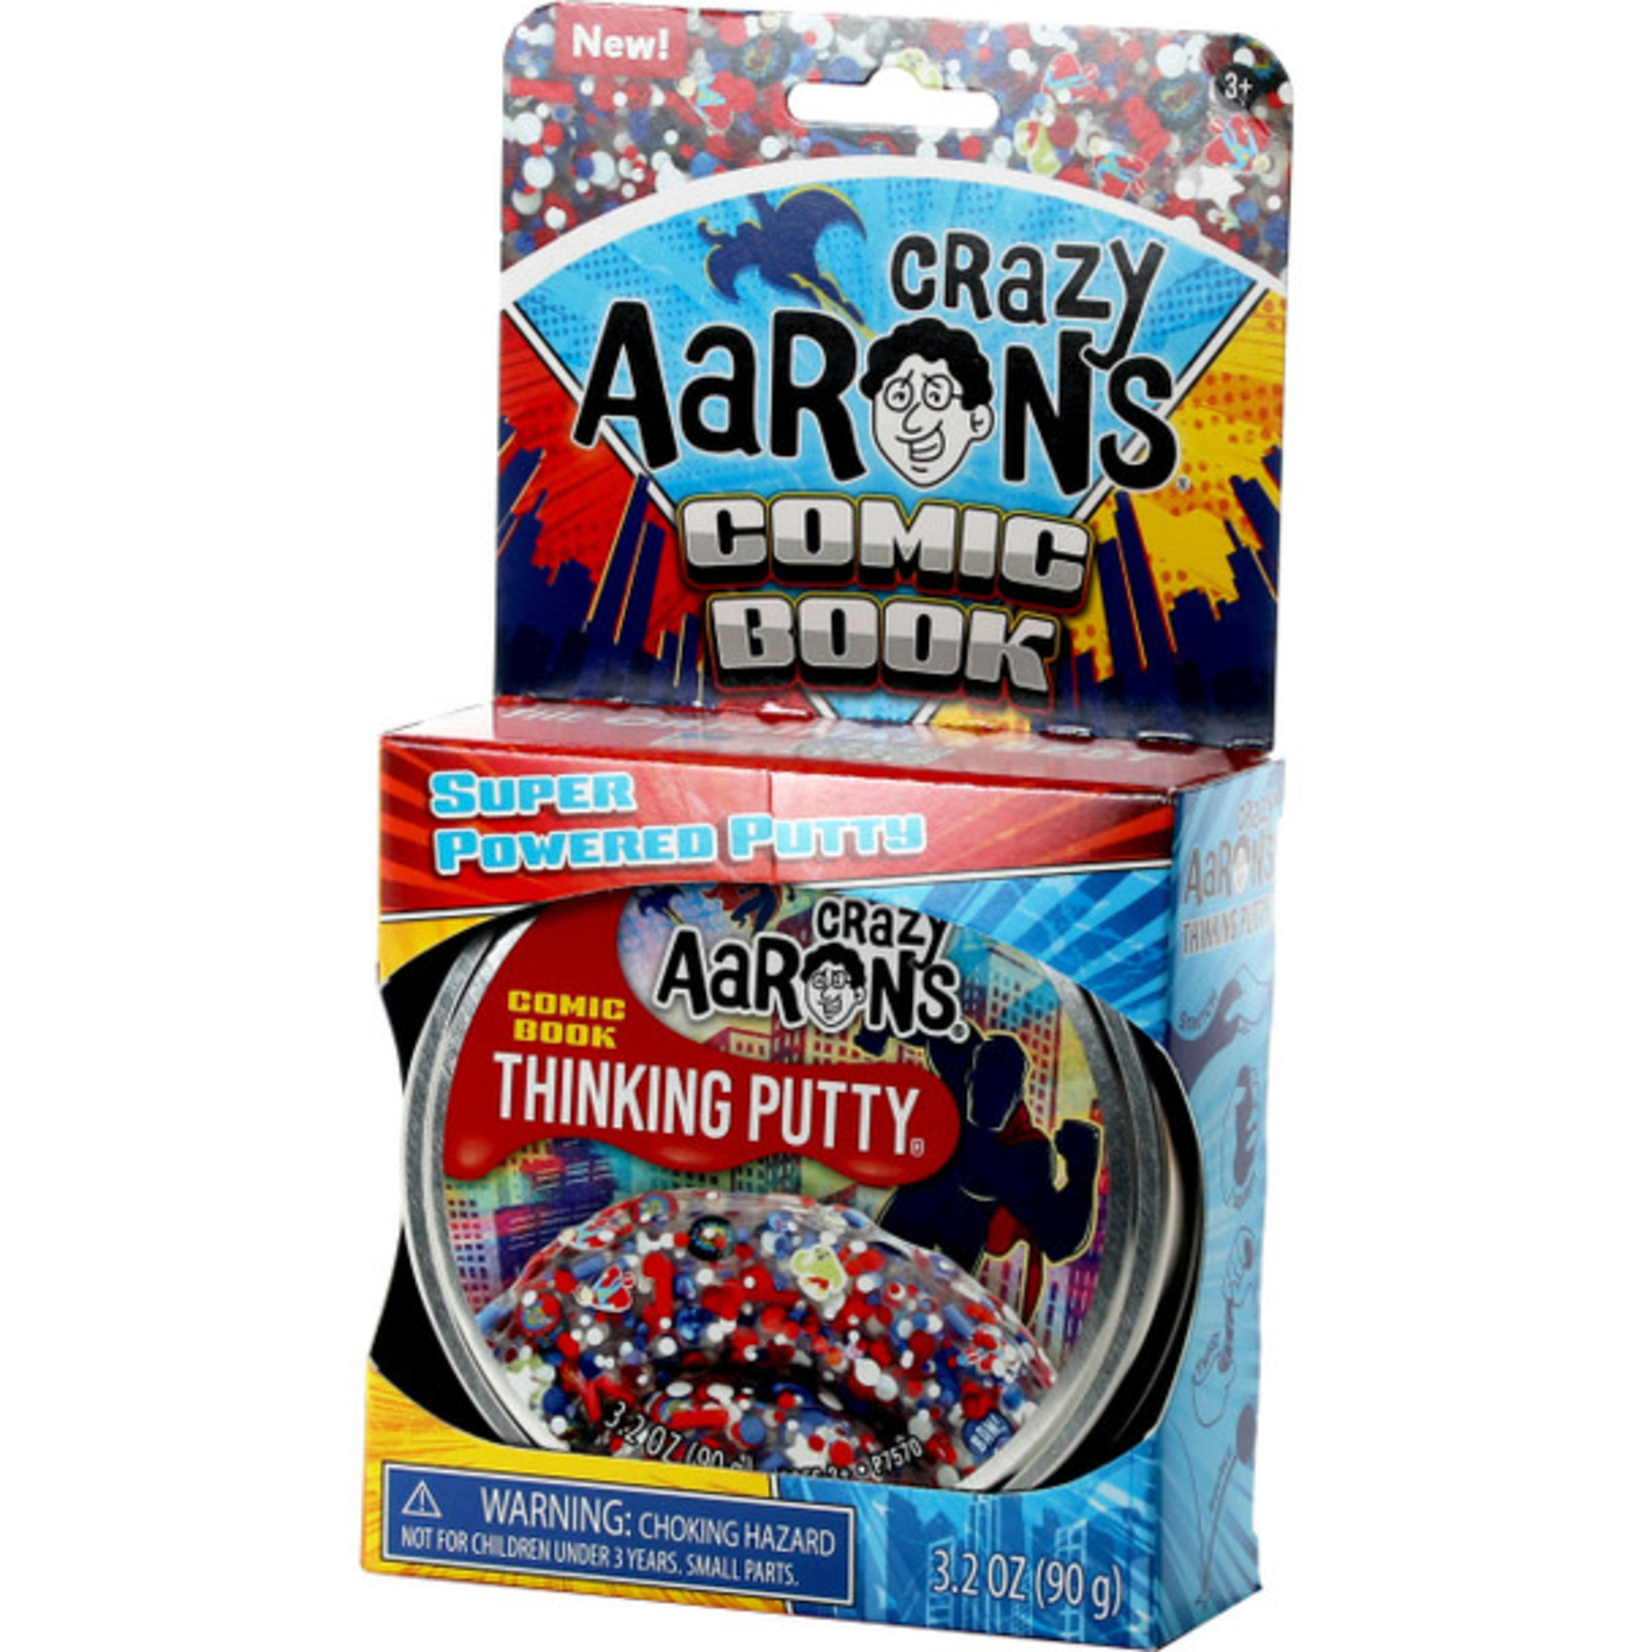 Crazy Aaron’s Thinking Putty - Comic Book